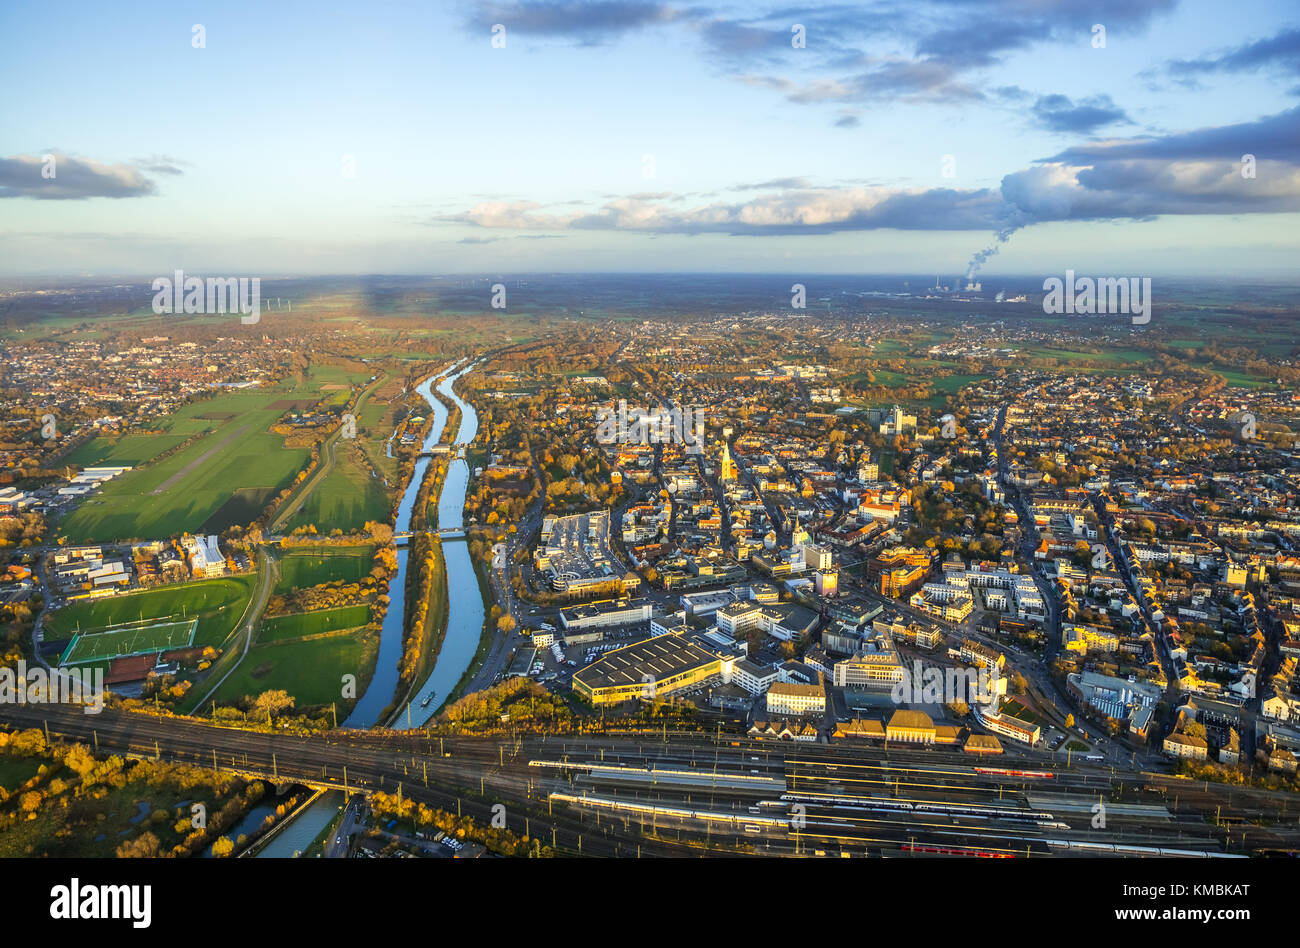 Overview of Hamm, Datteln-Hamm Canal, project 'Kanalkante' between Hamm Lippewiesen Airport and city centre of Hamm, river Stock Photo